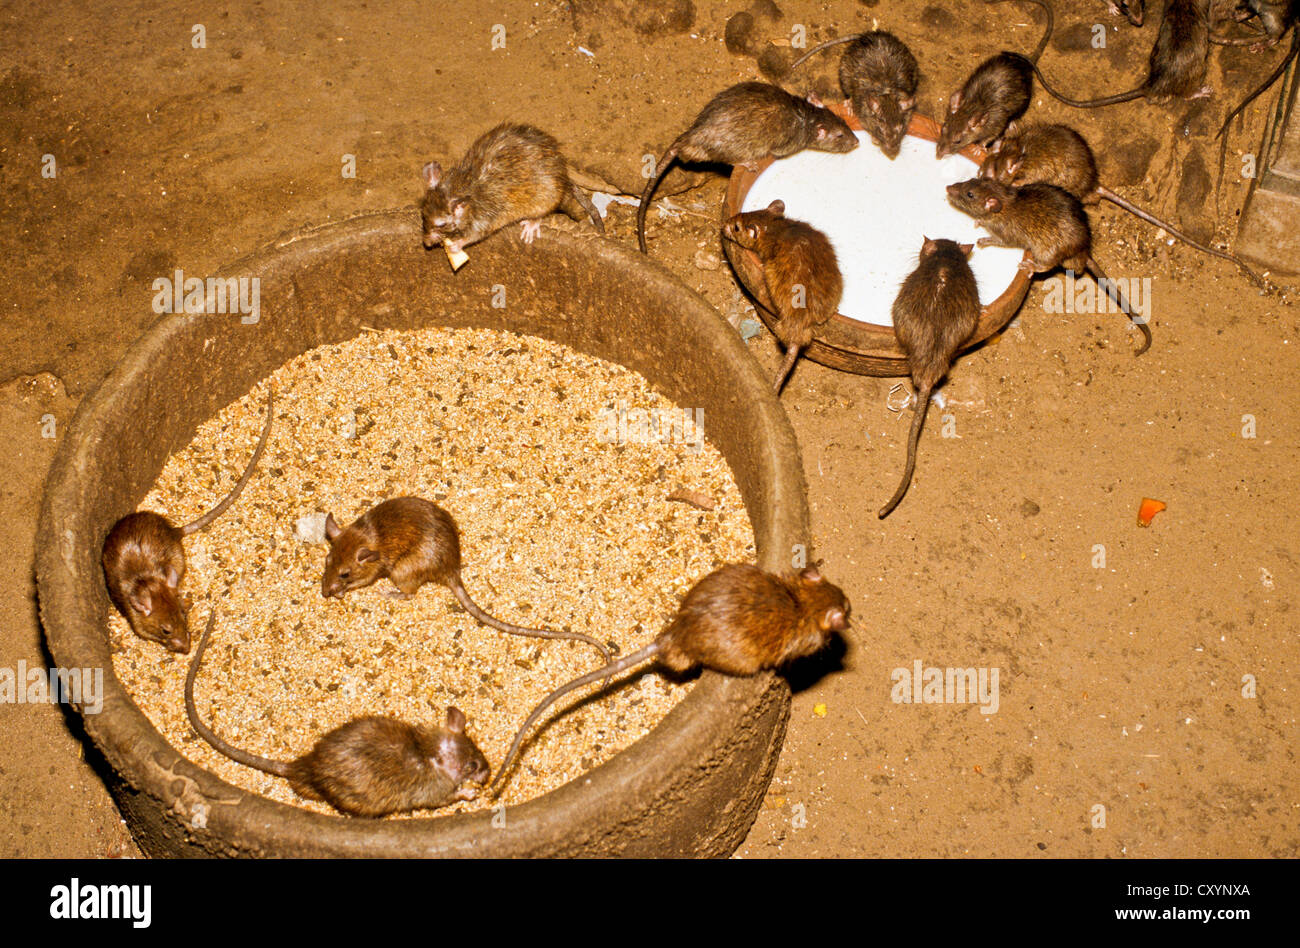 Rats of the Karni Mata Temple, believed to carry the souls of dead Sadhus until their next reincarnation, Deshnok, Rajasthan Stock Photo